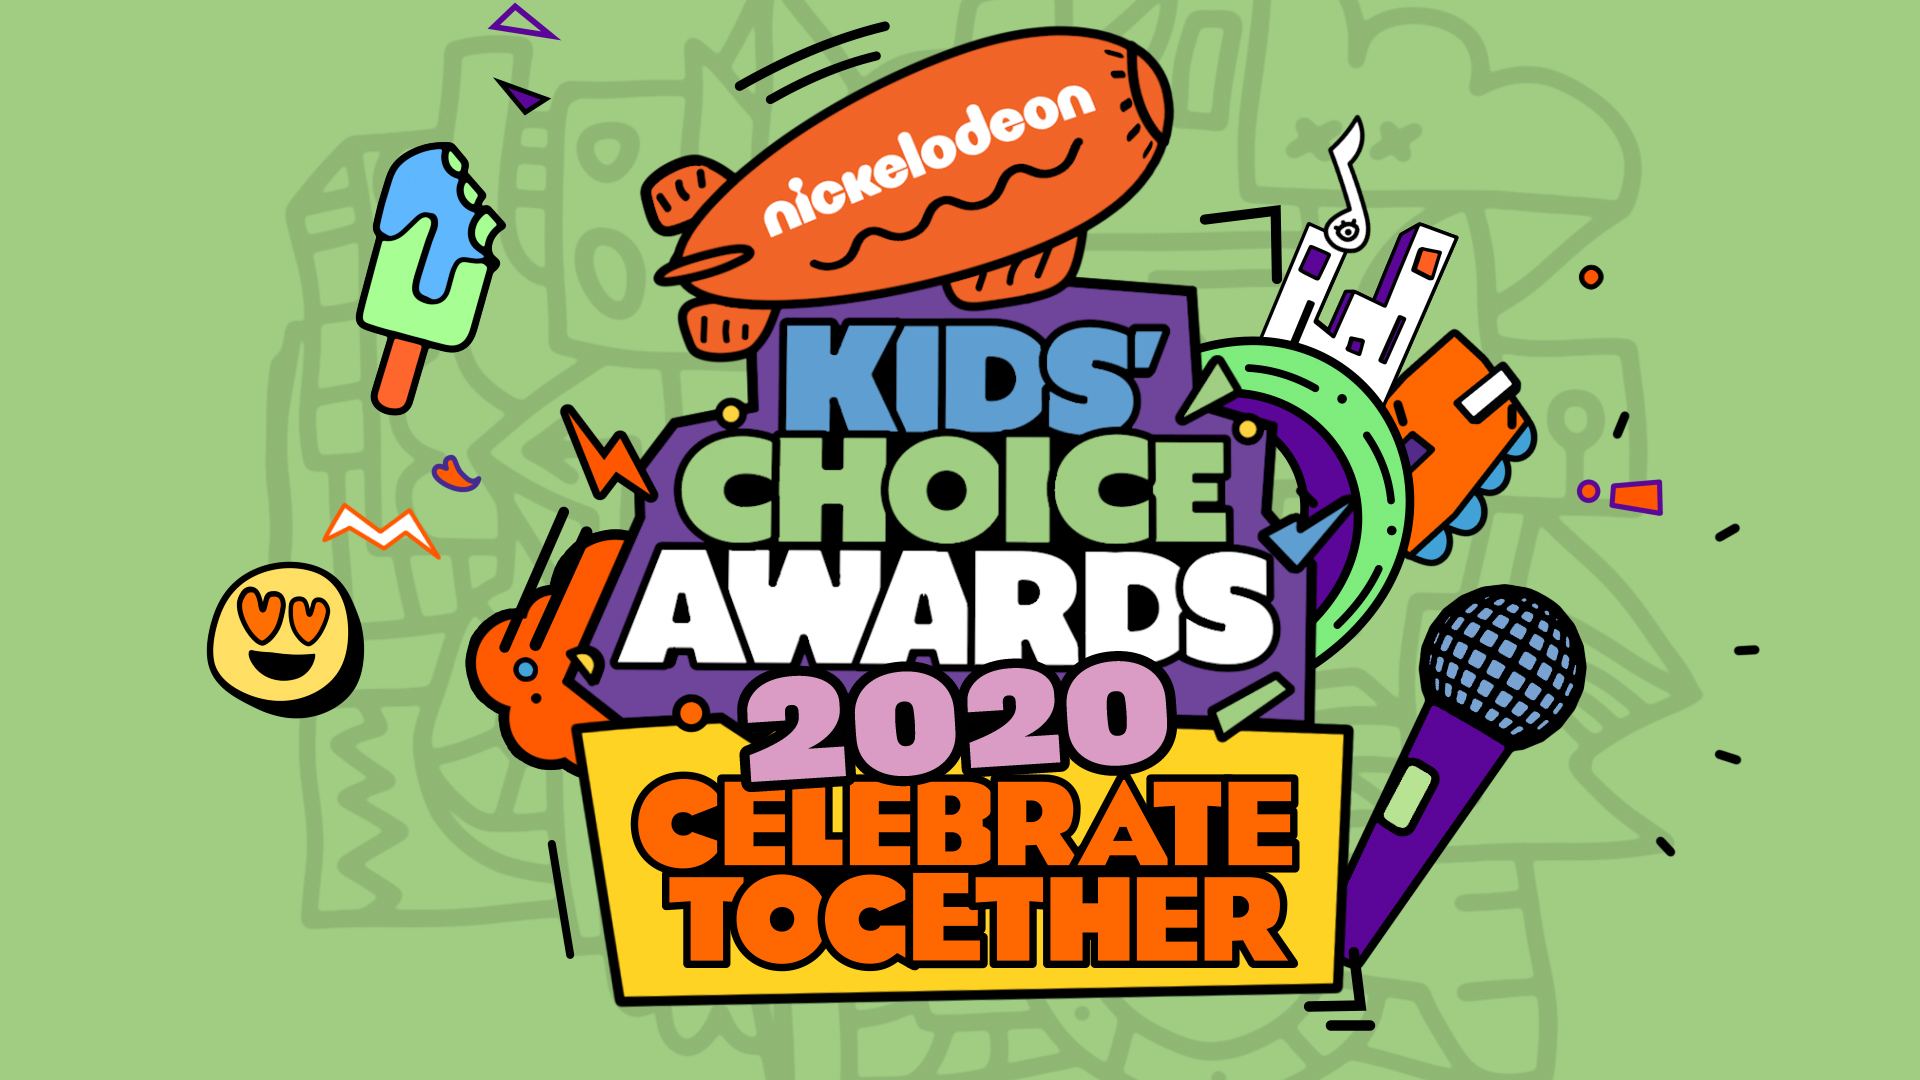 Highlights from Nickelodeon’s Kids’ Choice Awards 2020 Celebrate